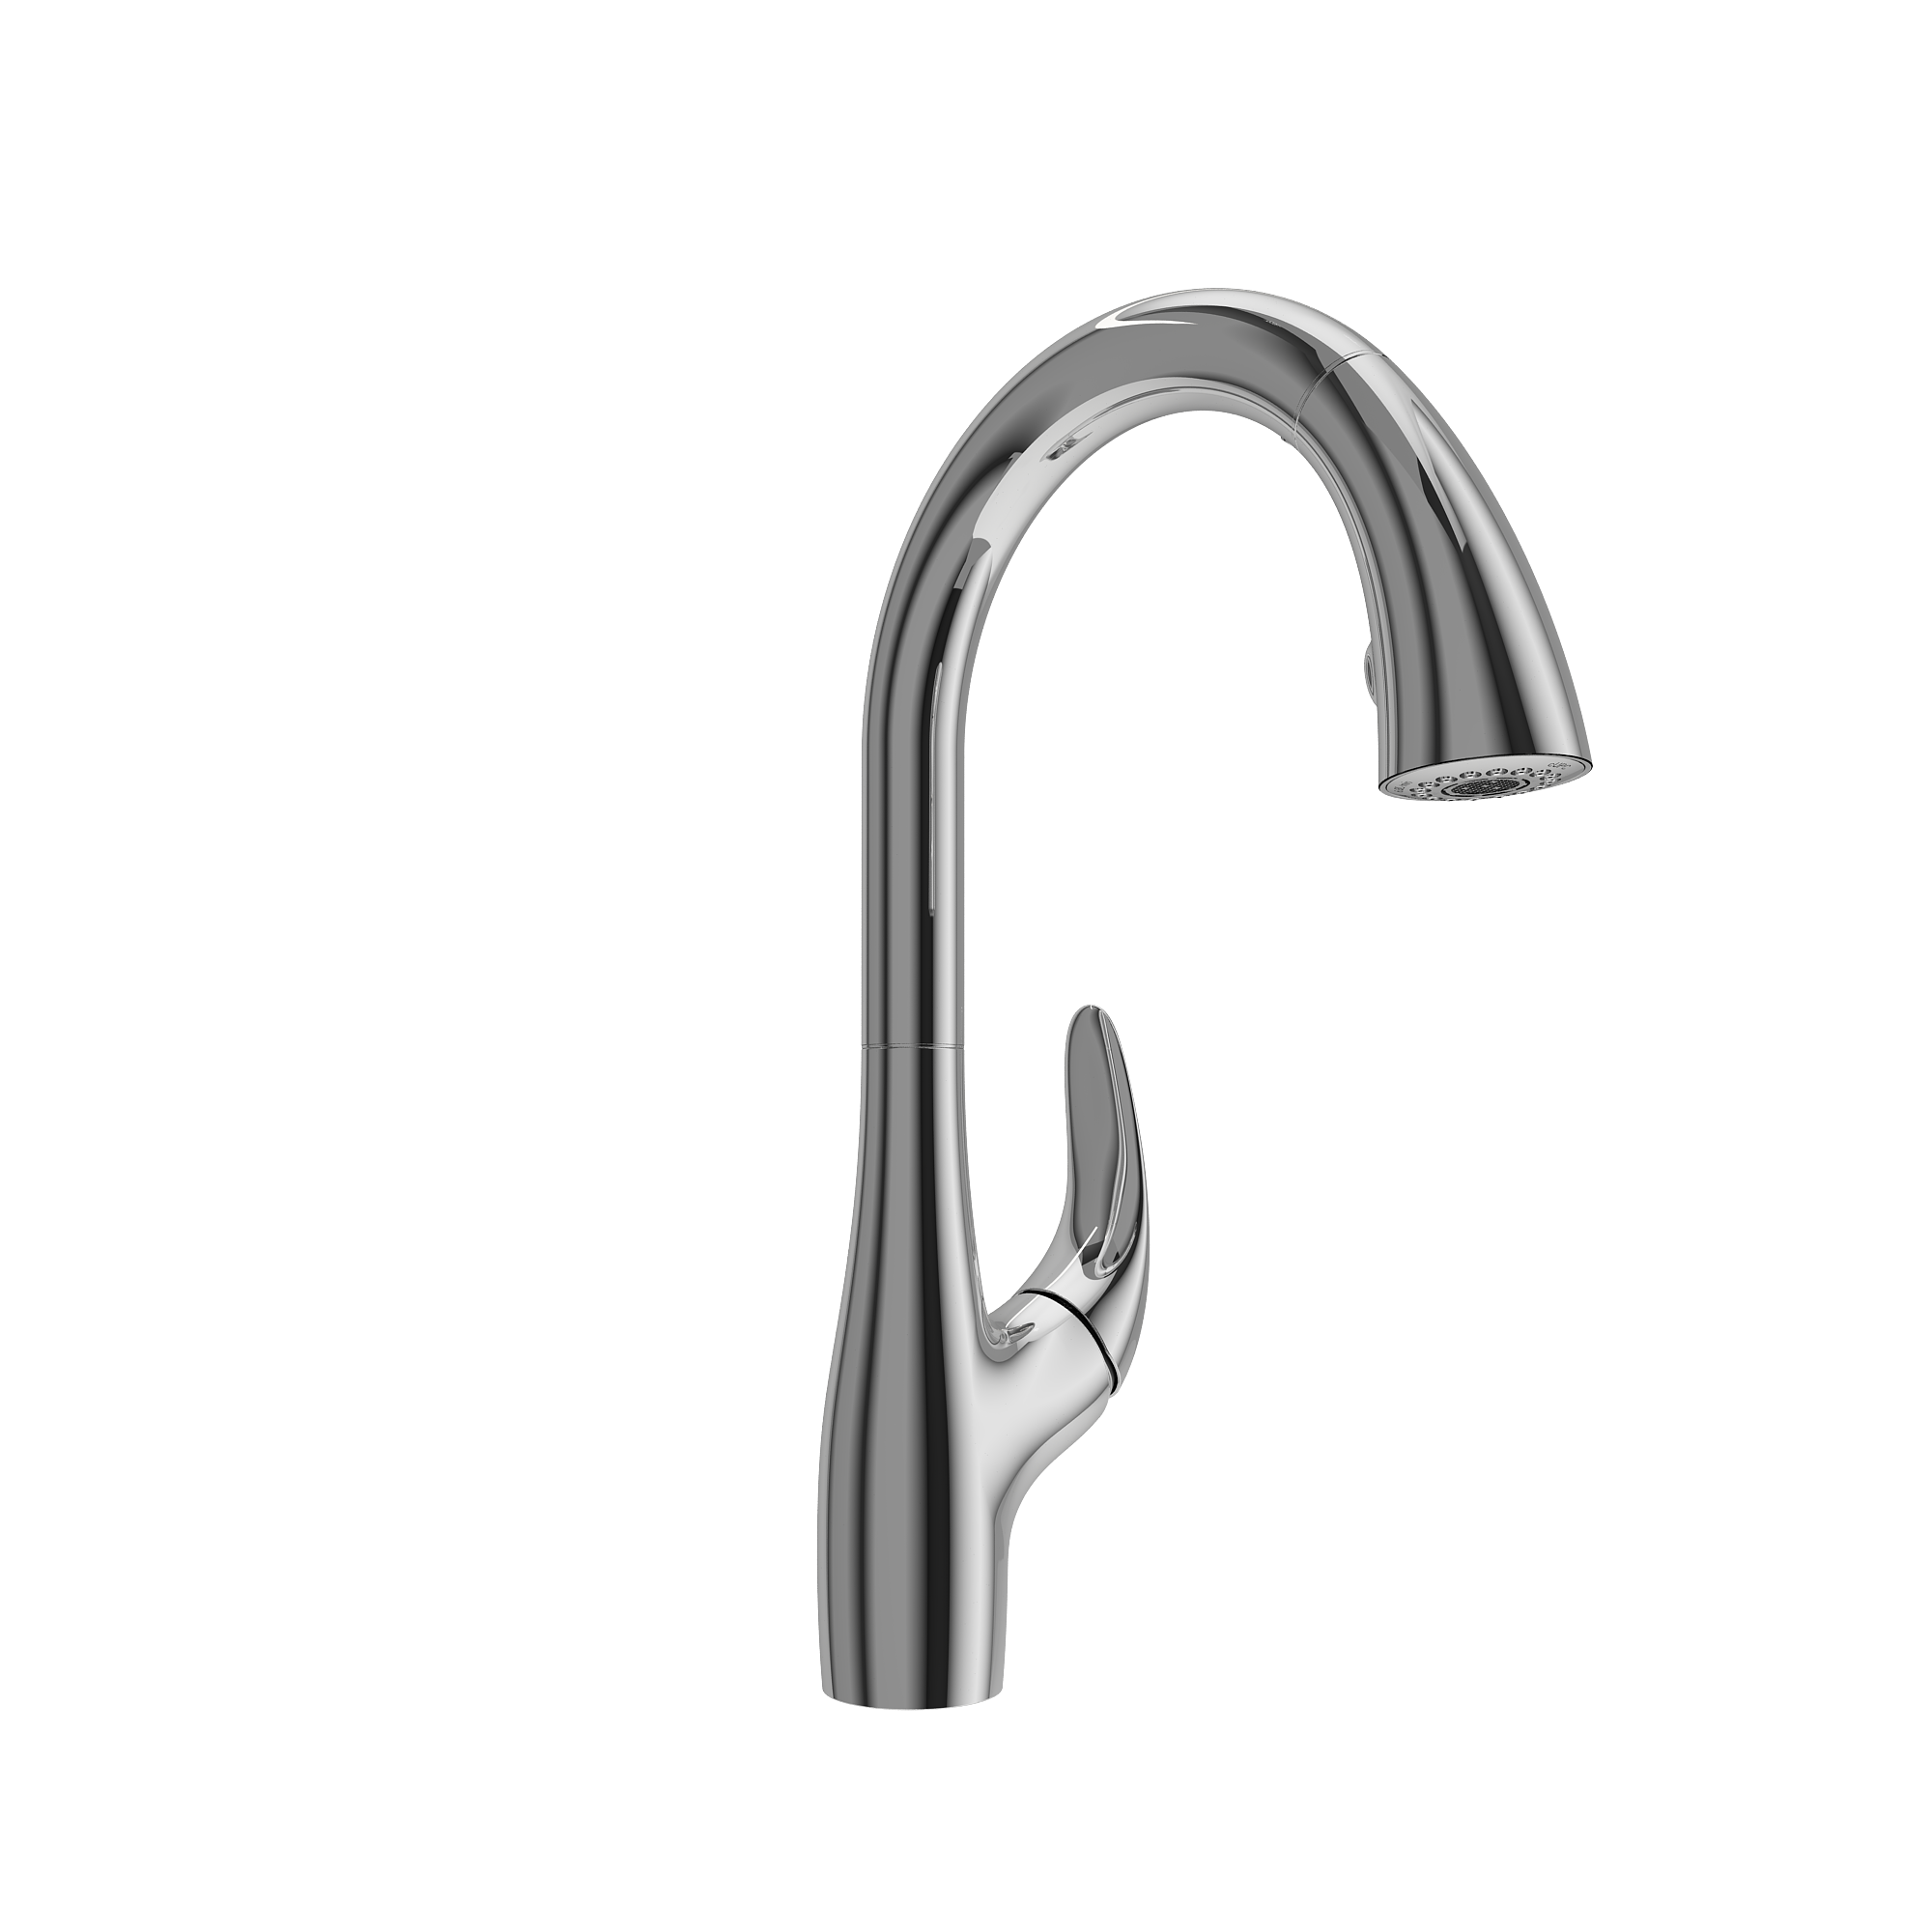 Pagano 2.0 Pull-Down Kitchen Faucet in Chrome | KitchBath